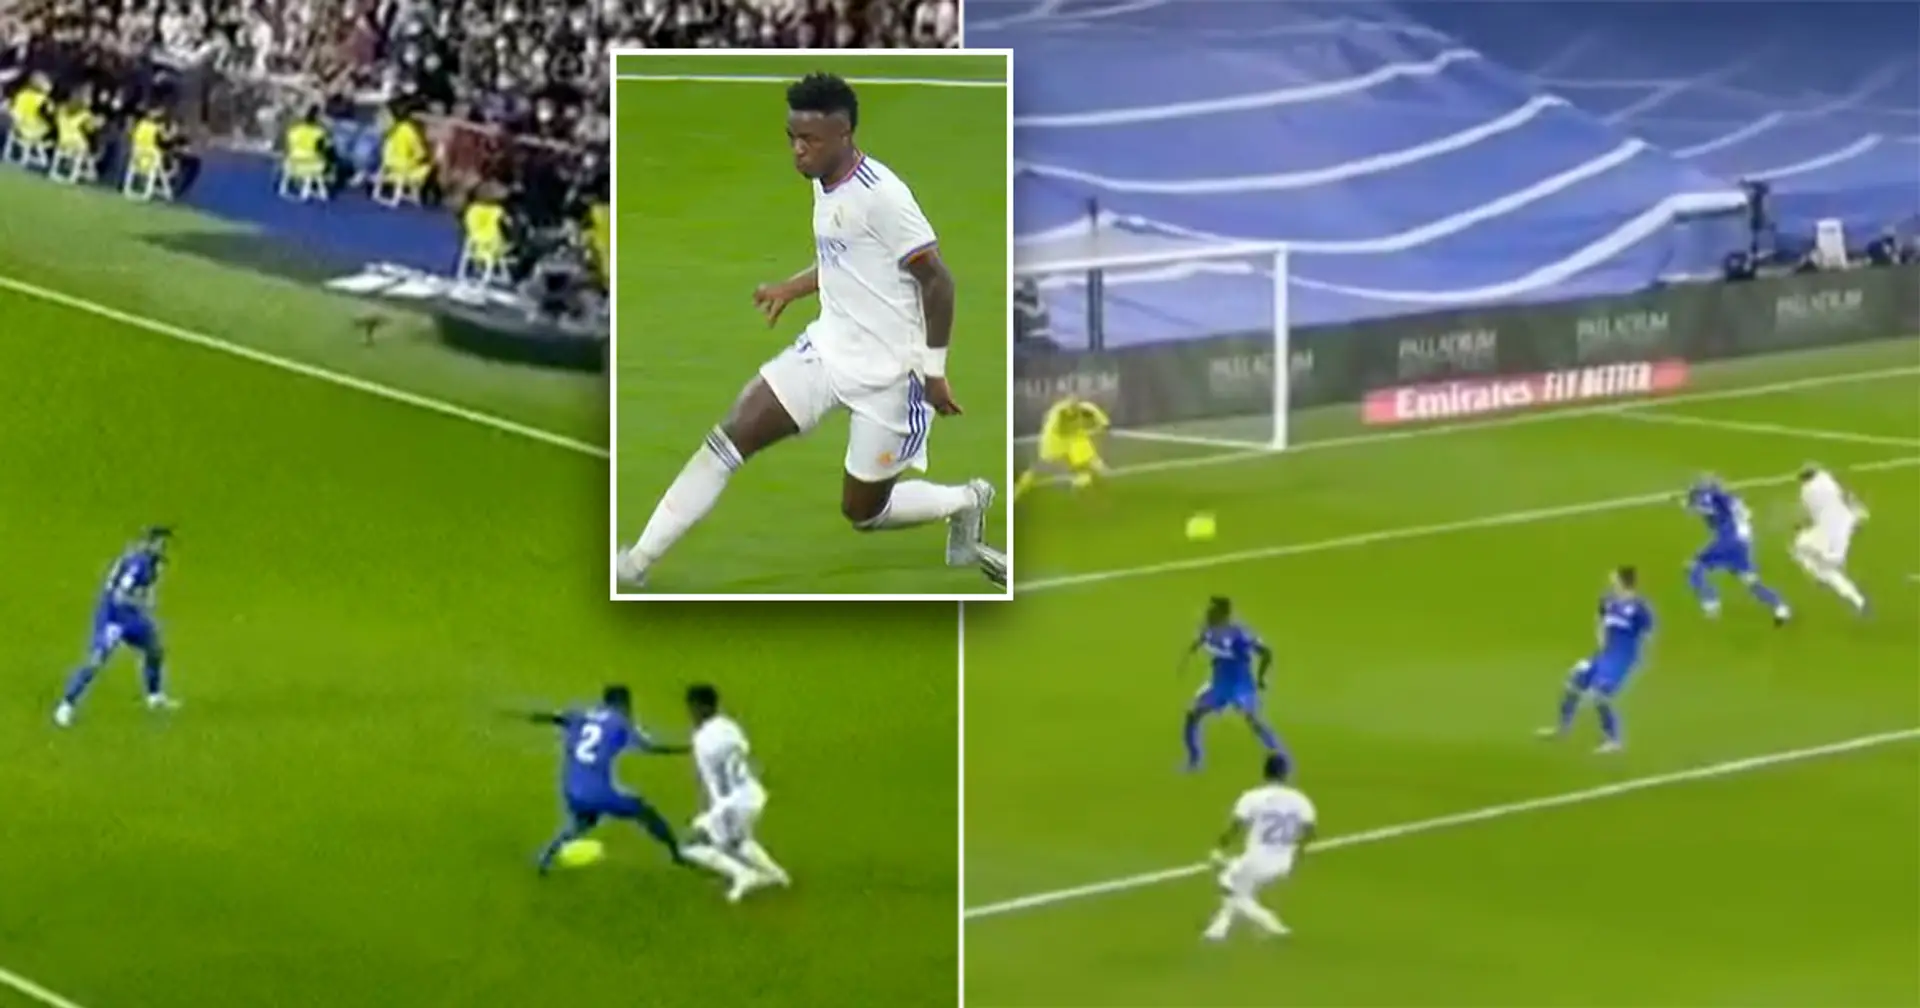 Nutmegs one of La Liga's toughest defenders, provides gorgeous assist: Vinicius Jr has a night to remember